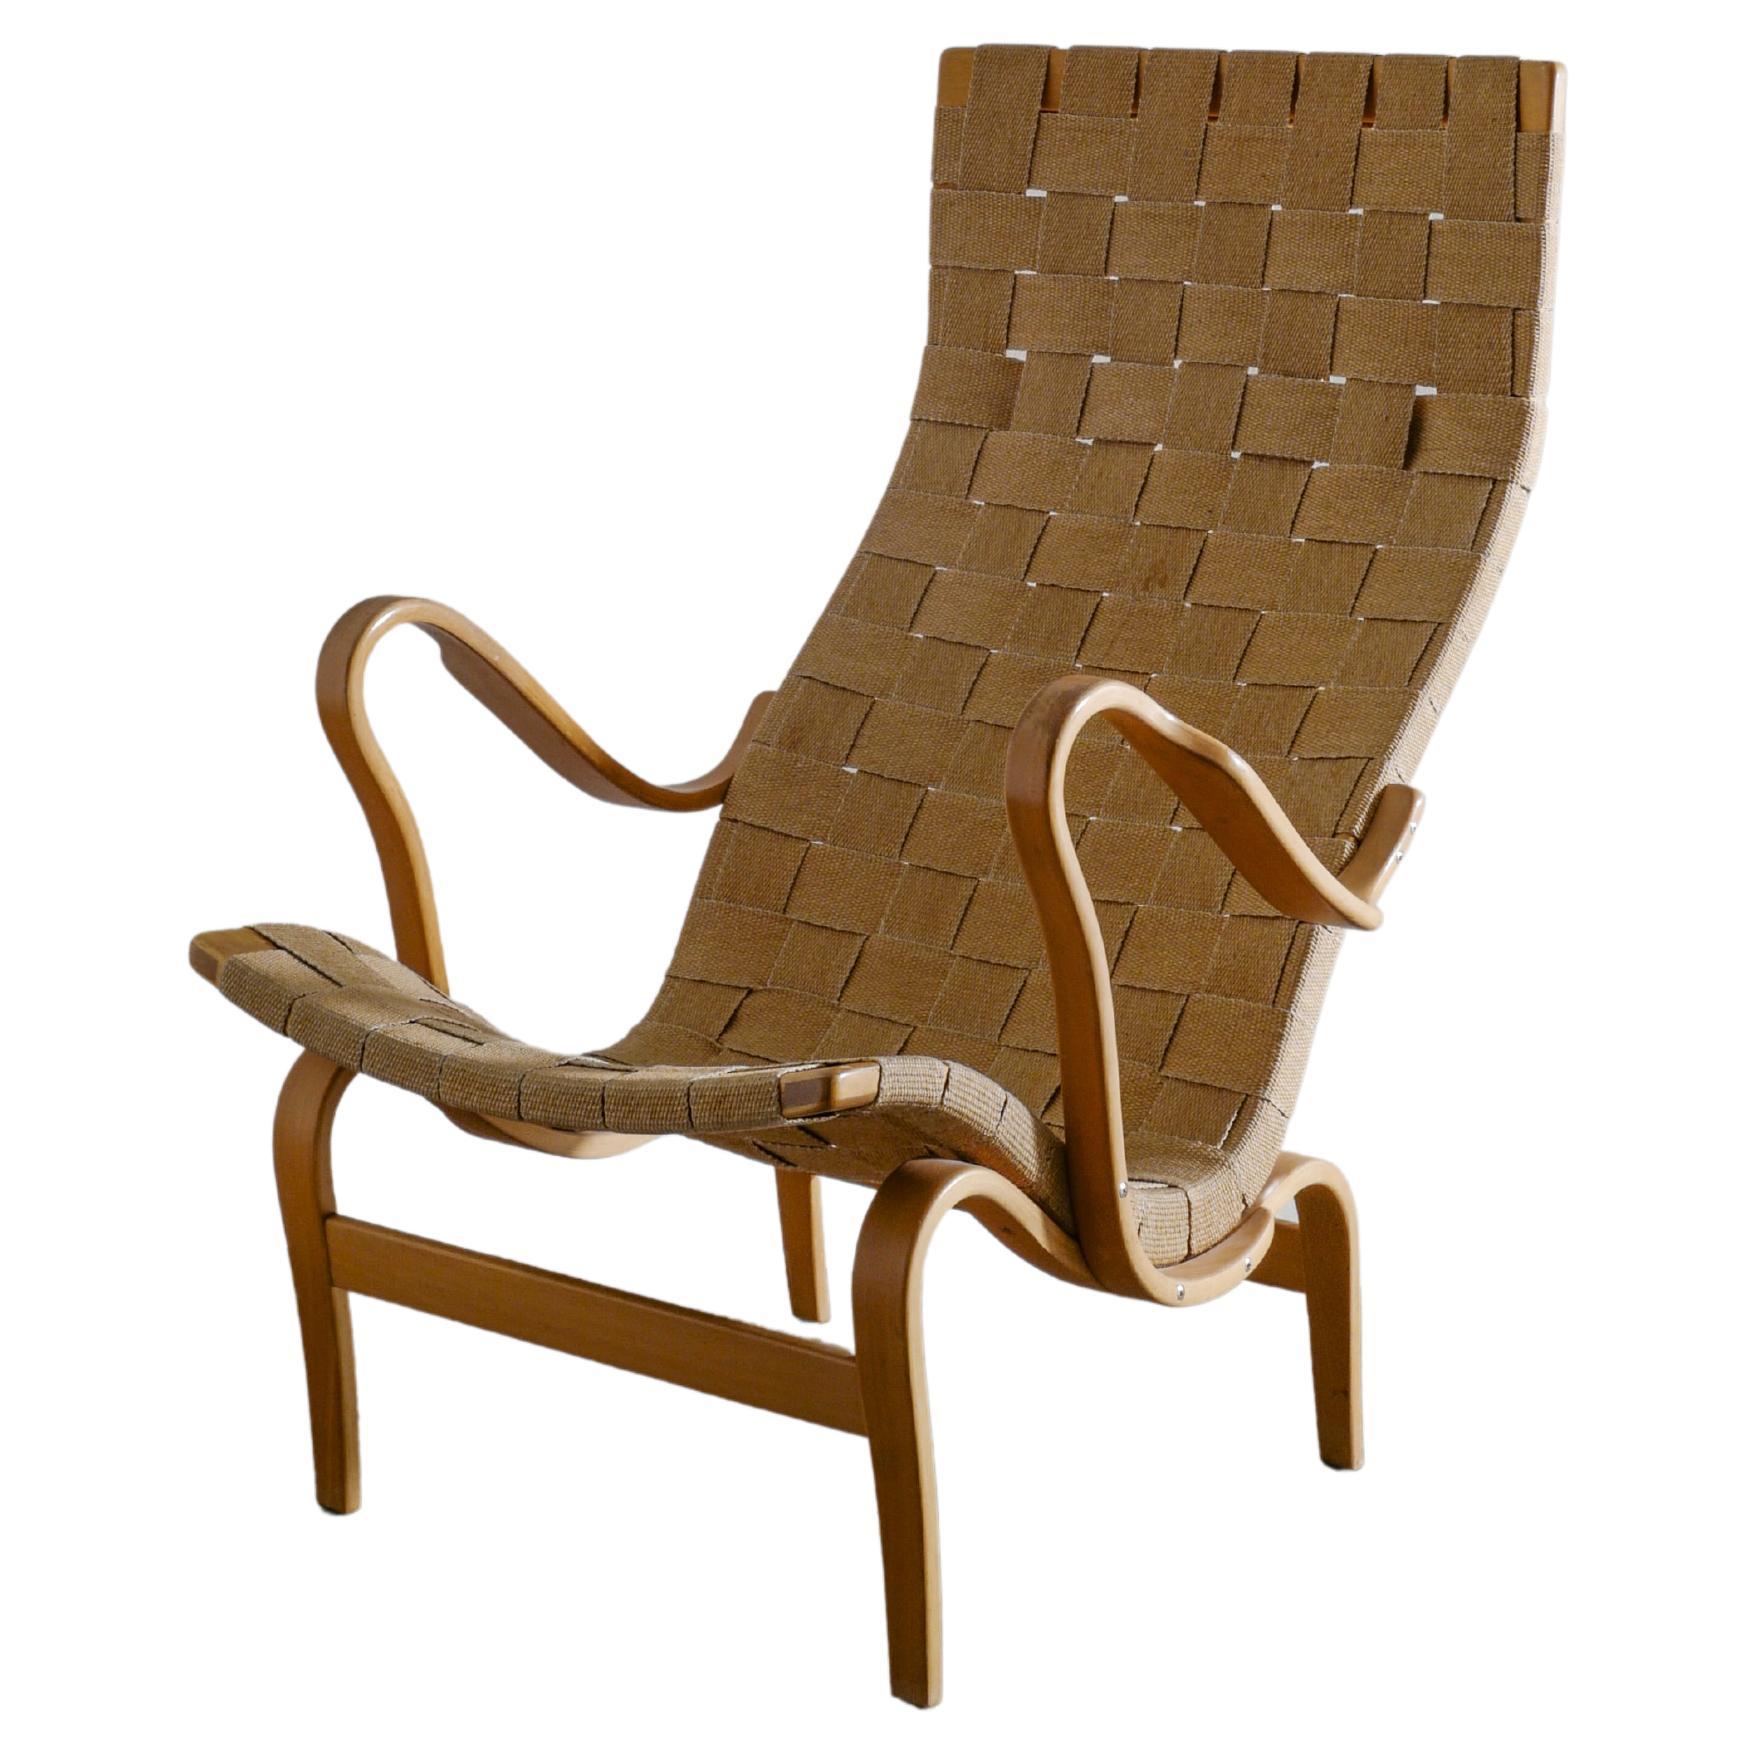 Bruno Mathsson "Pernilla" Lounge Arm Chair in Beech Produced in Sweden, 1976